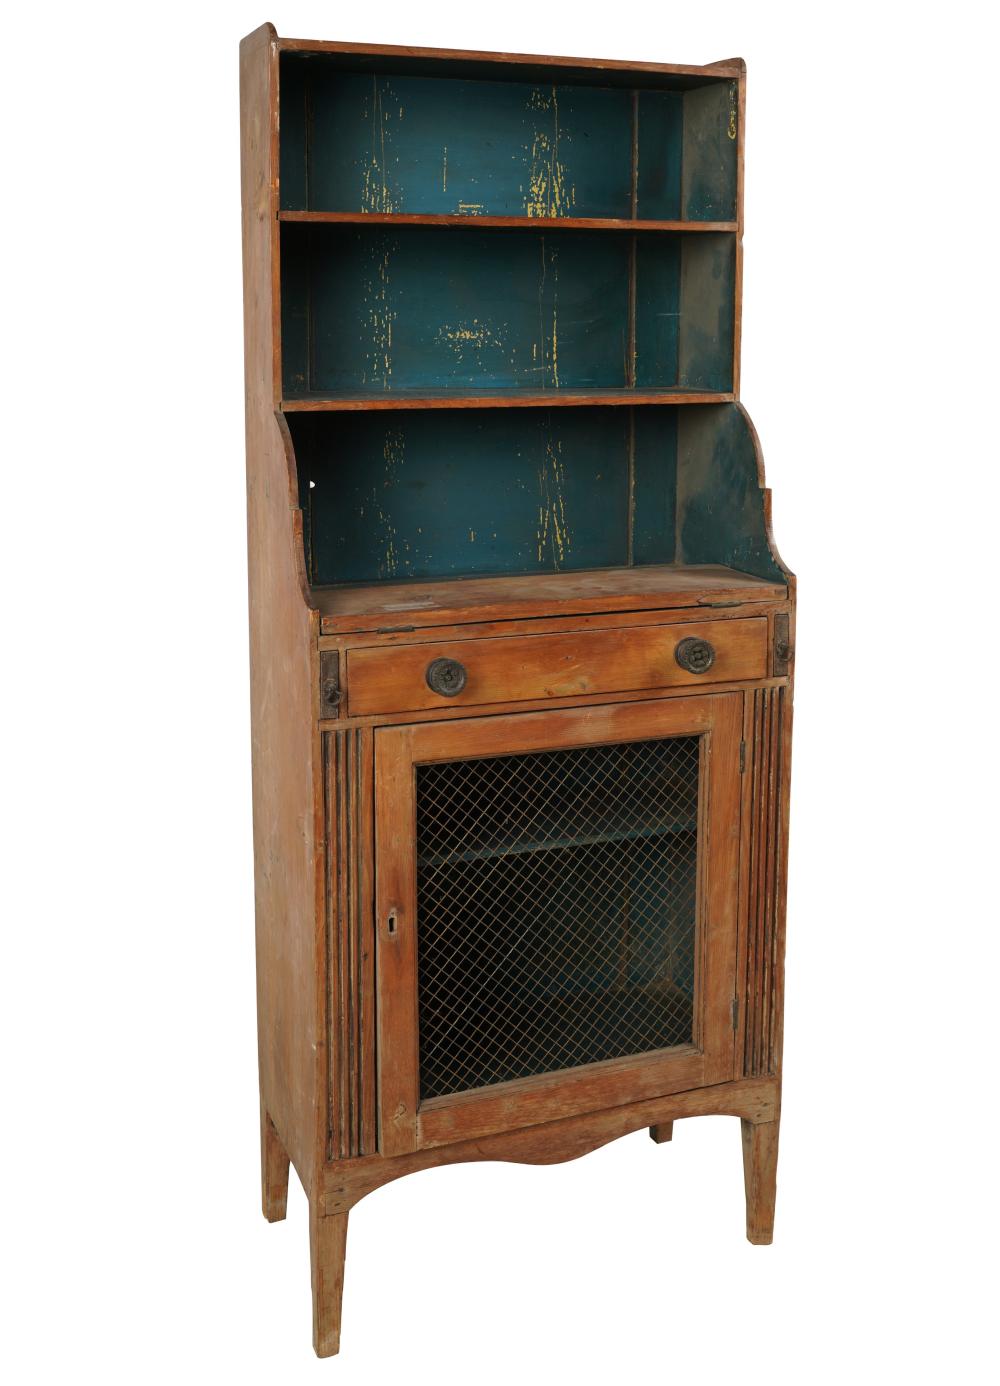 ANTIQUE COUNTRY PINE BOOKCASEthe 301670